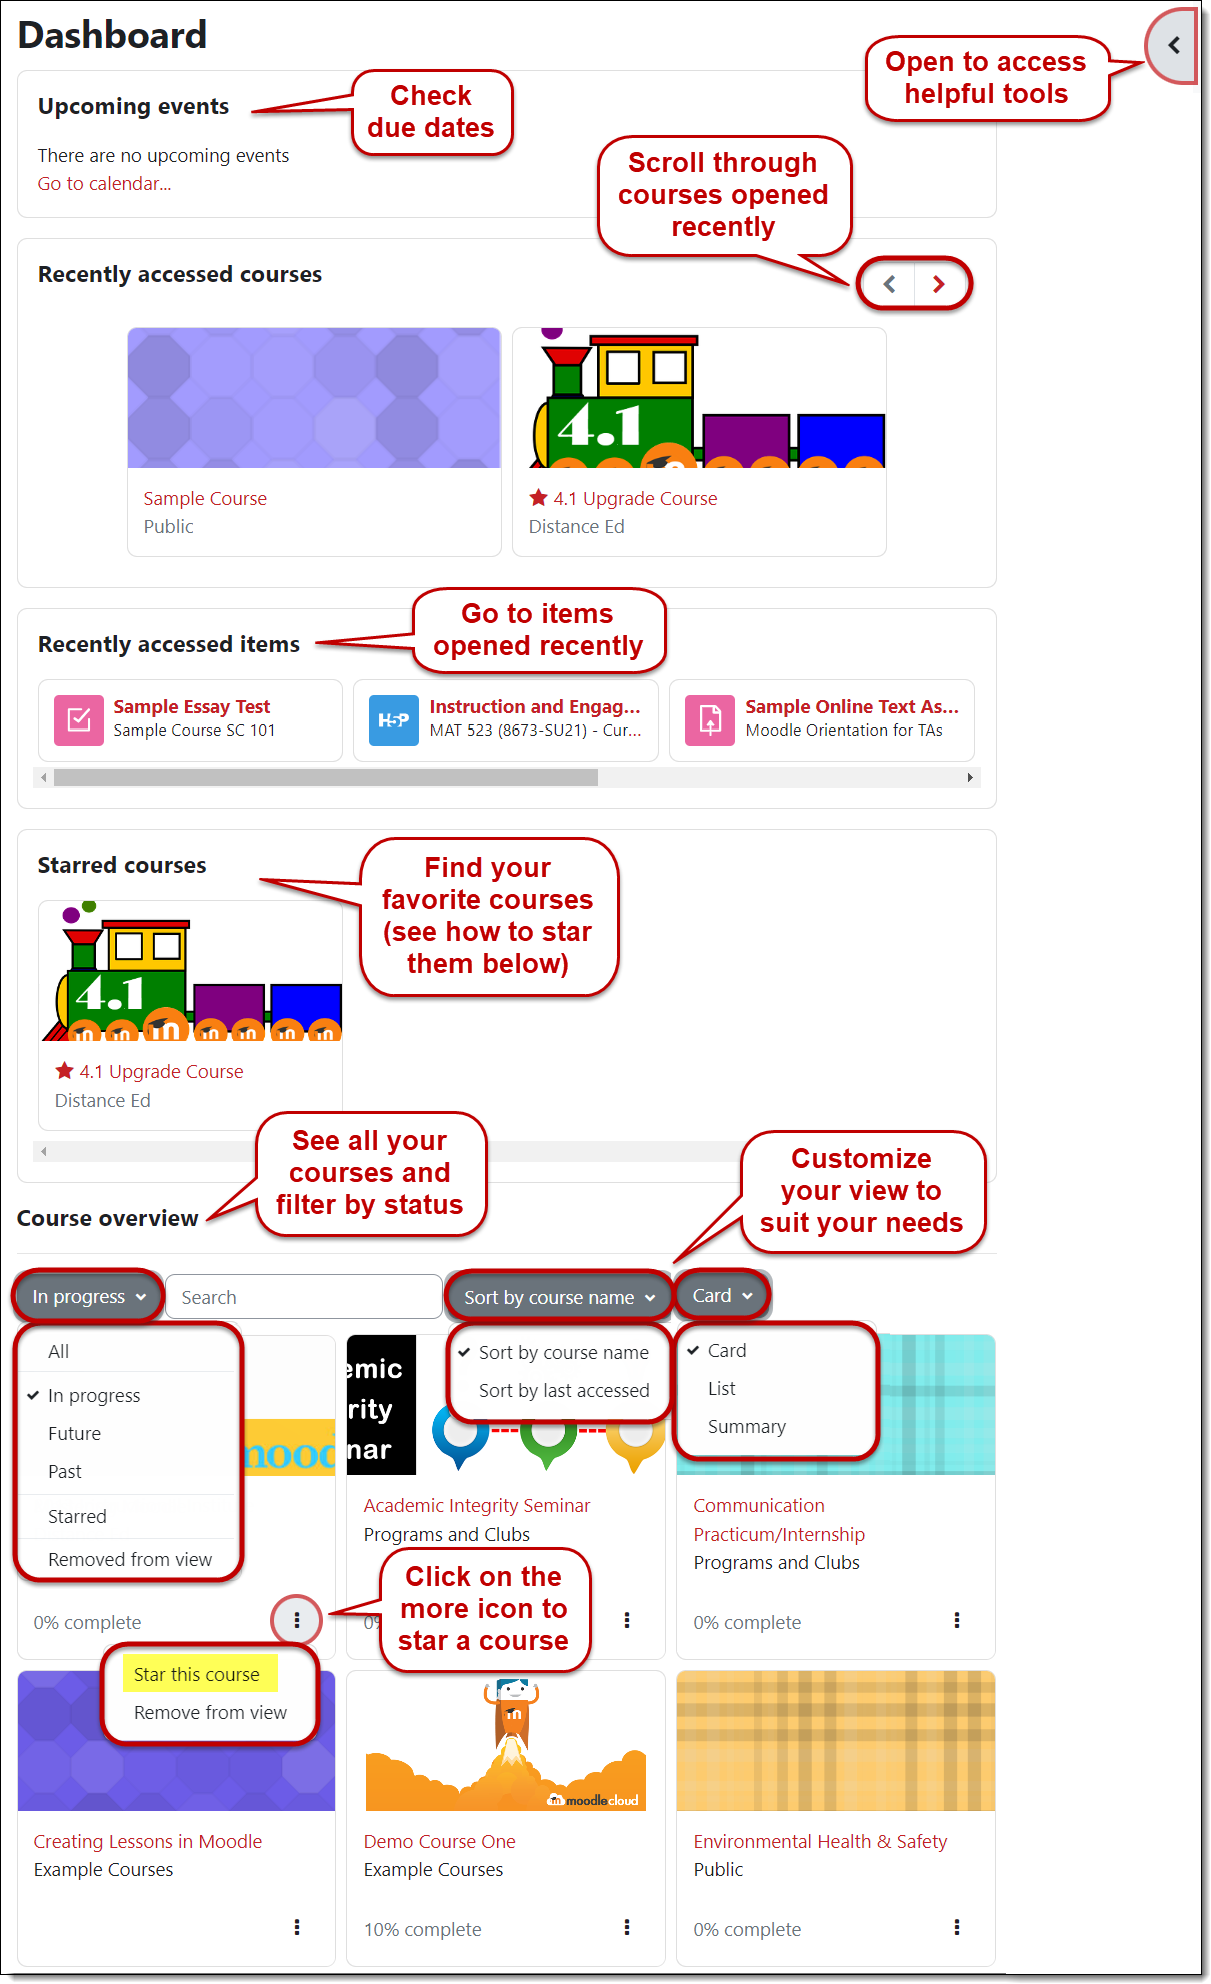 Annotated guide to main dashboard page. See linked article for specifics.